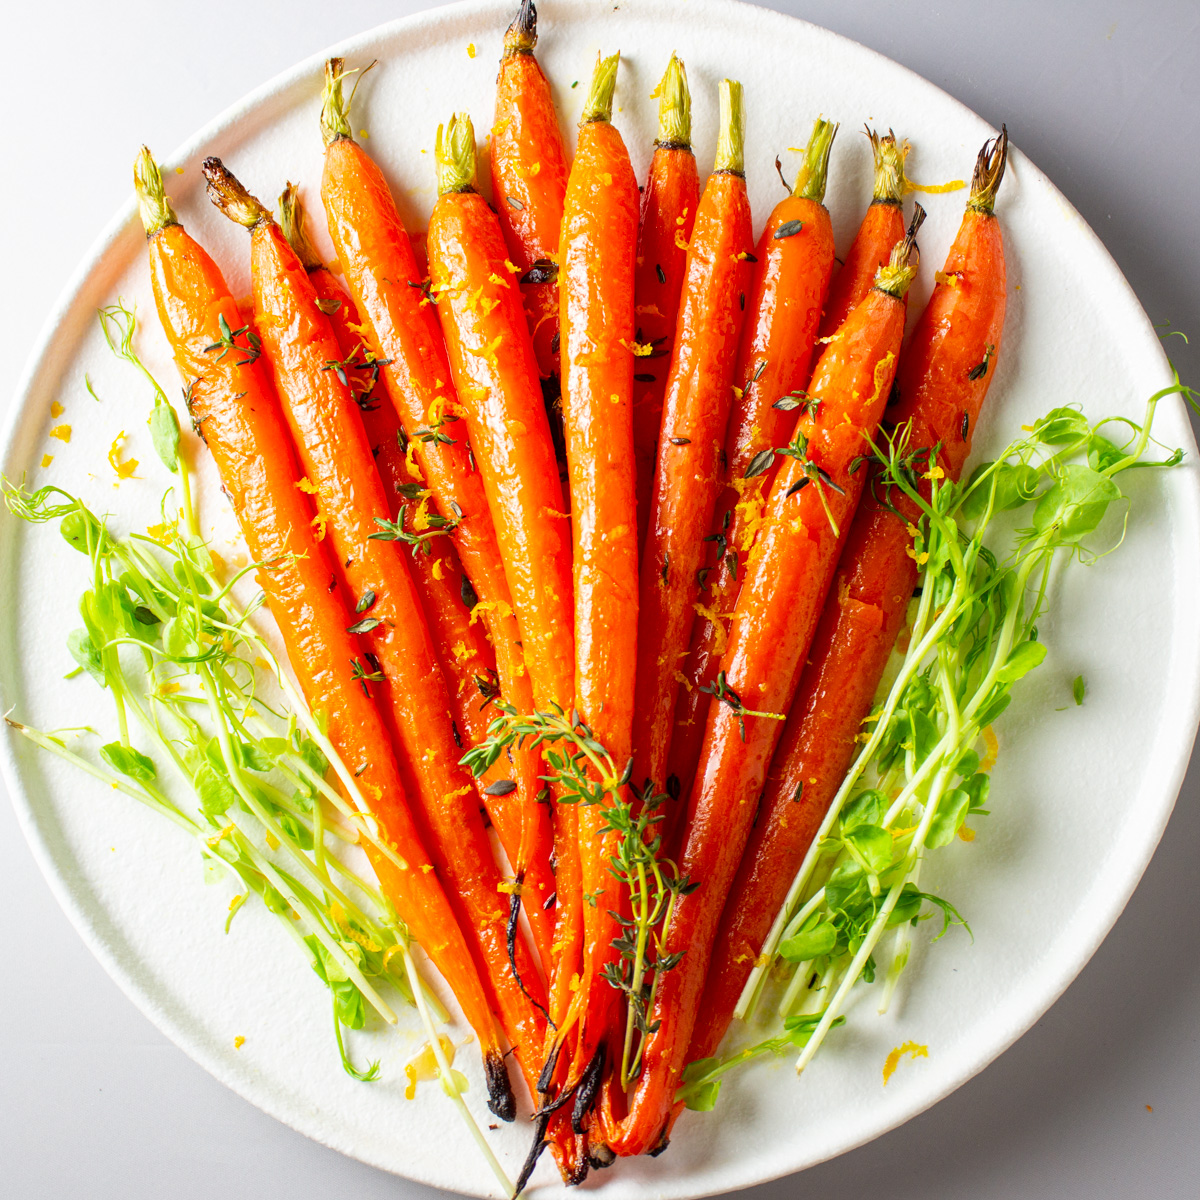 Maple Glazed Carrots With Thyme and Orange Zest